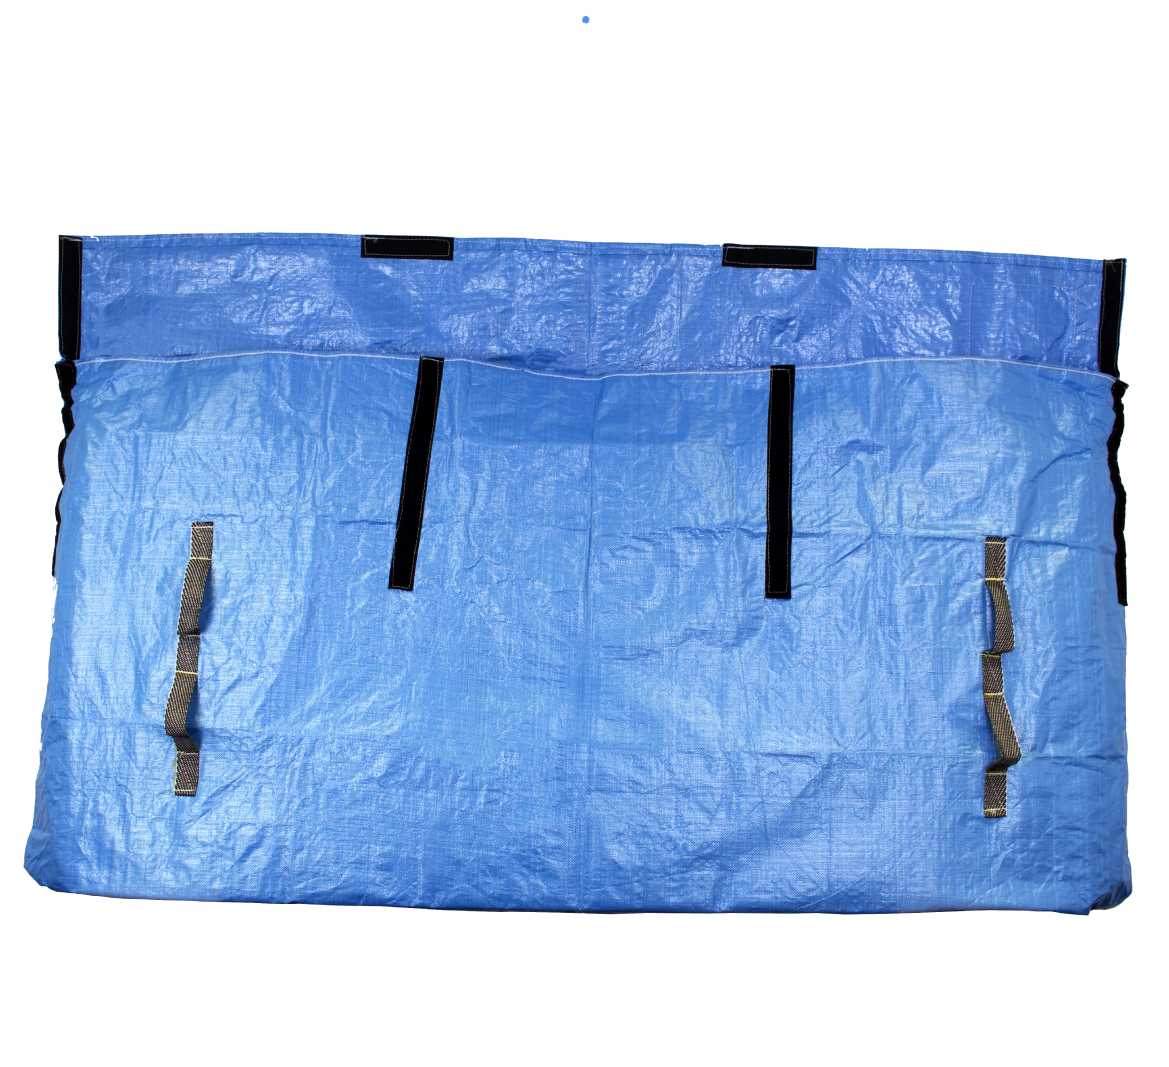 New style blue mattress bag with lid open, showing adjustable velcro closures and reinforced carry handles